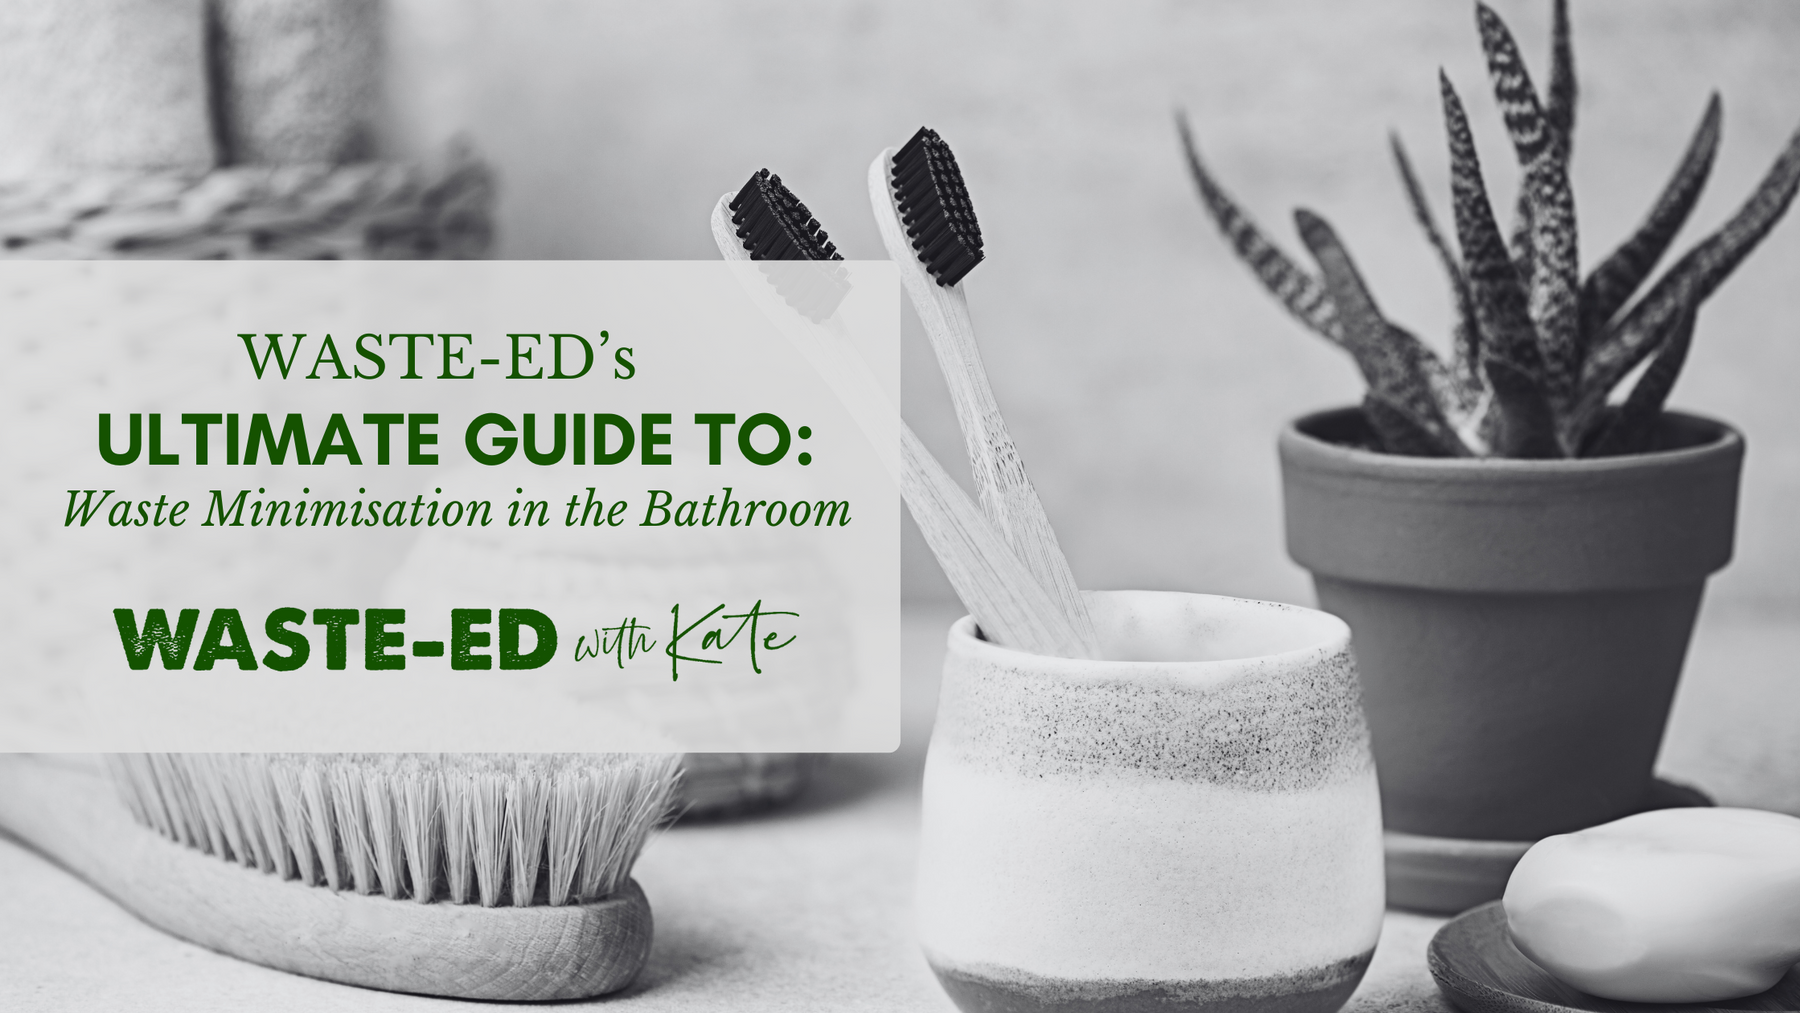 Waste-Eds Ultimate Guide: Waste Minimisation in the Bathroom